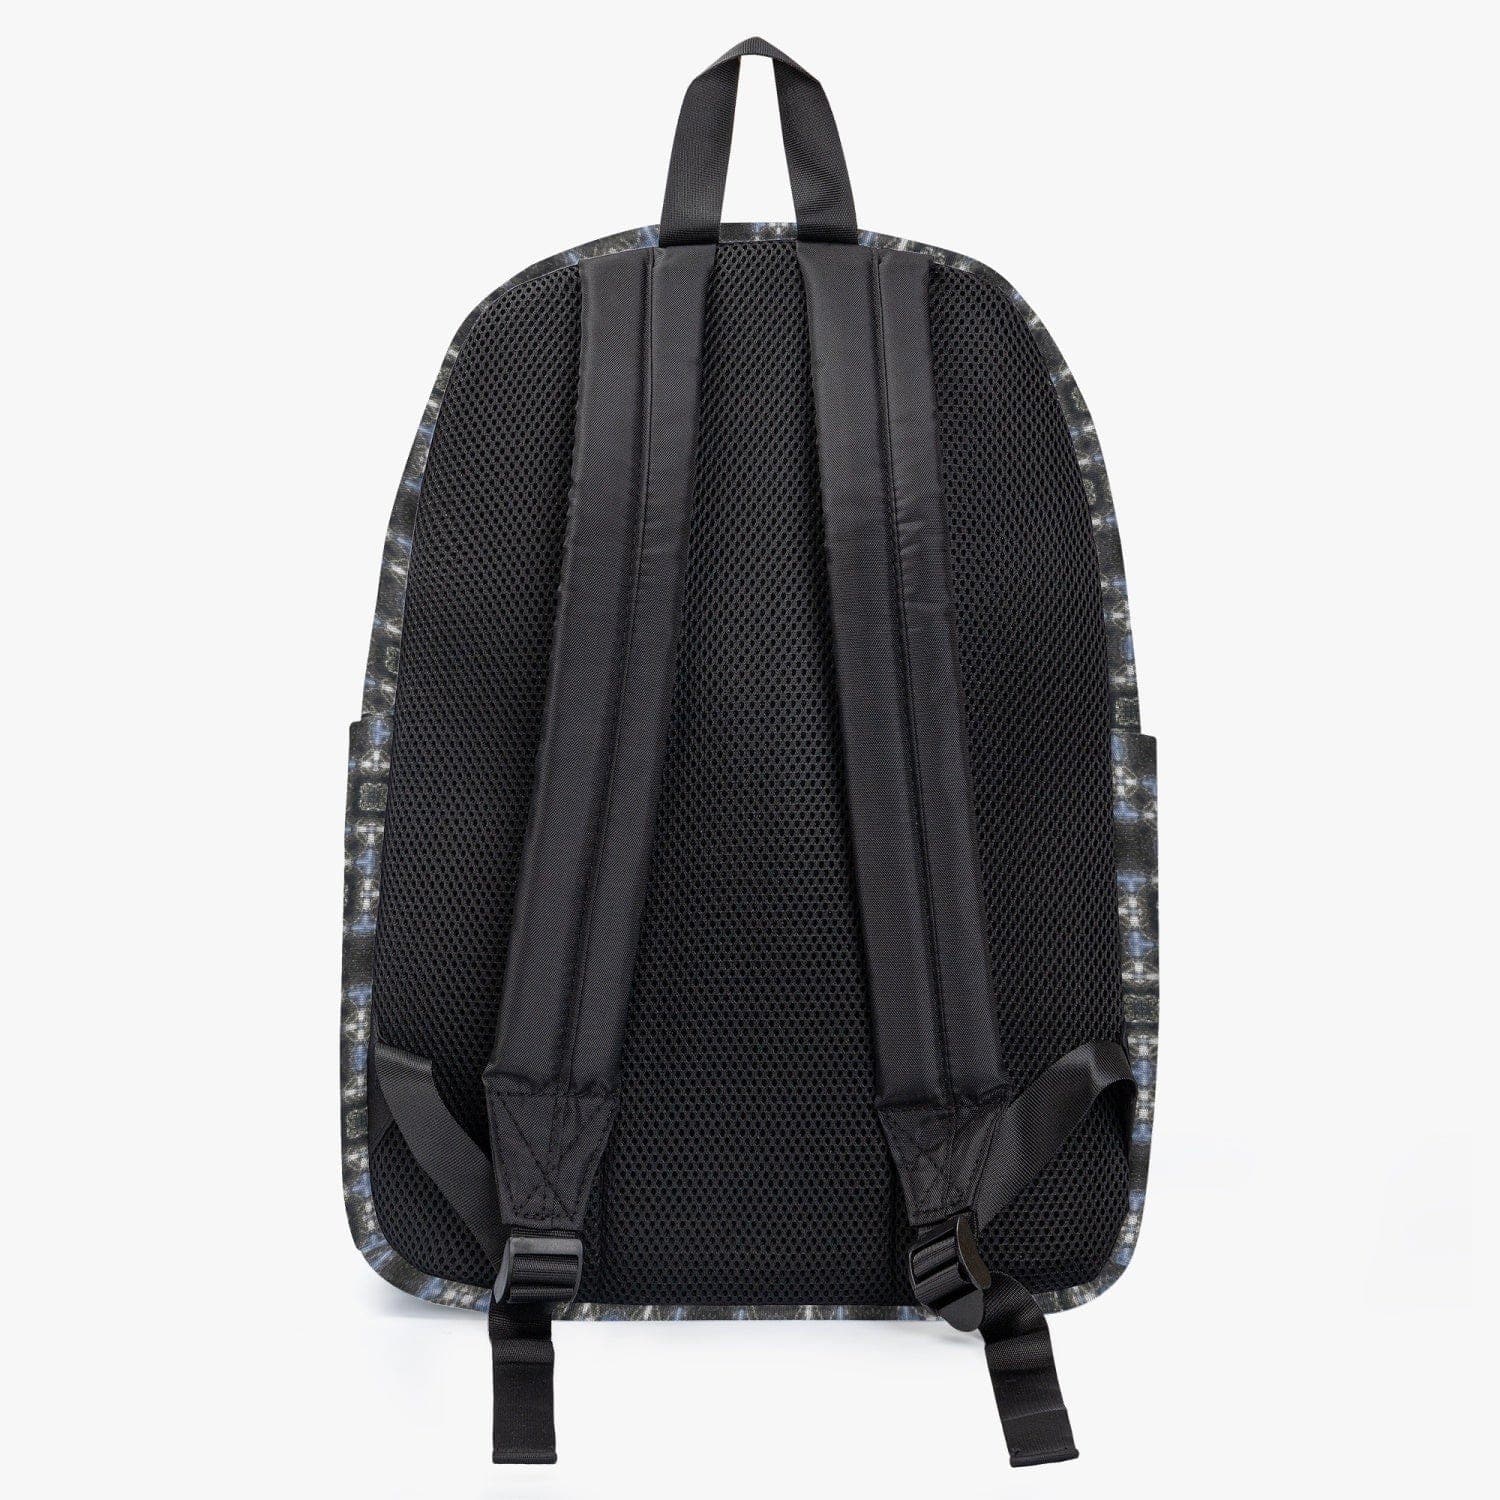 Mountain and field,  Canvas Backpack, designed by Sensus Studio Design